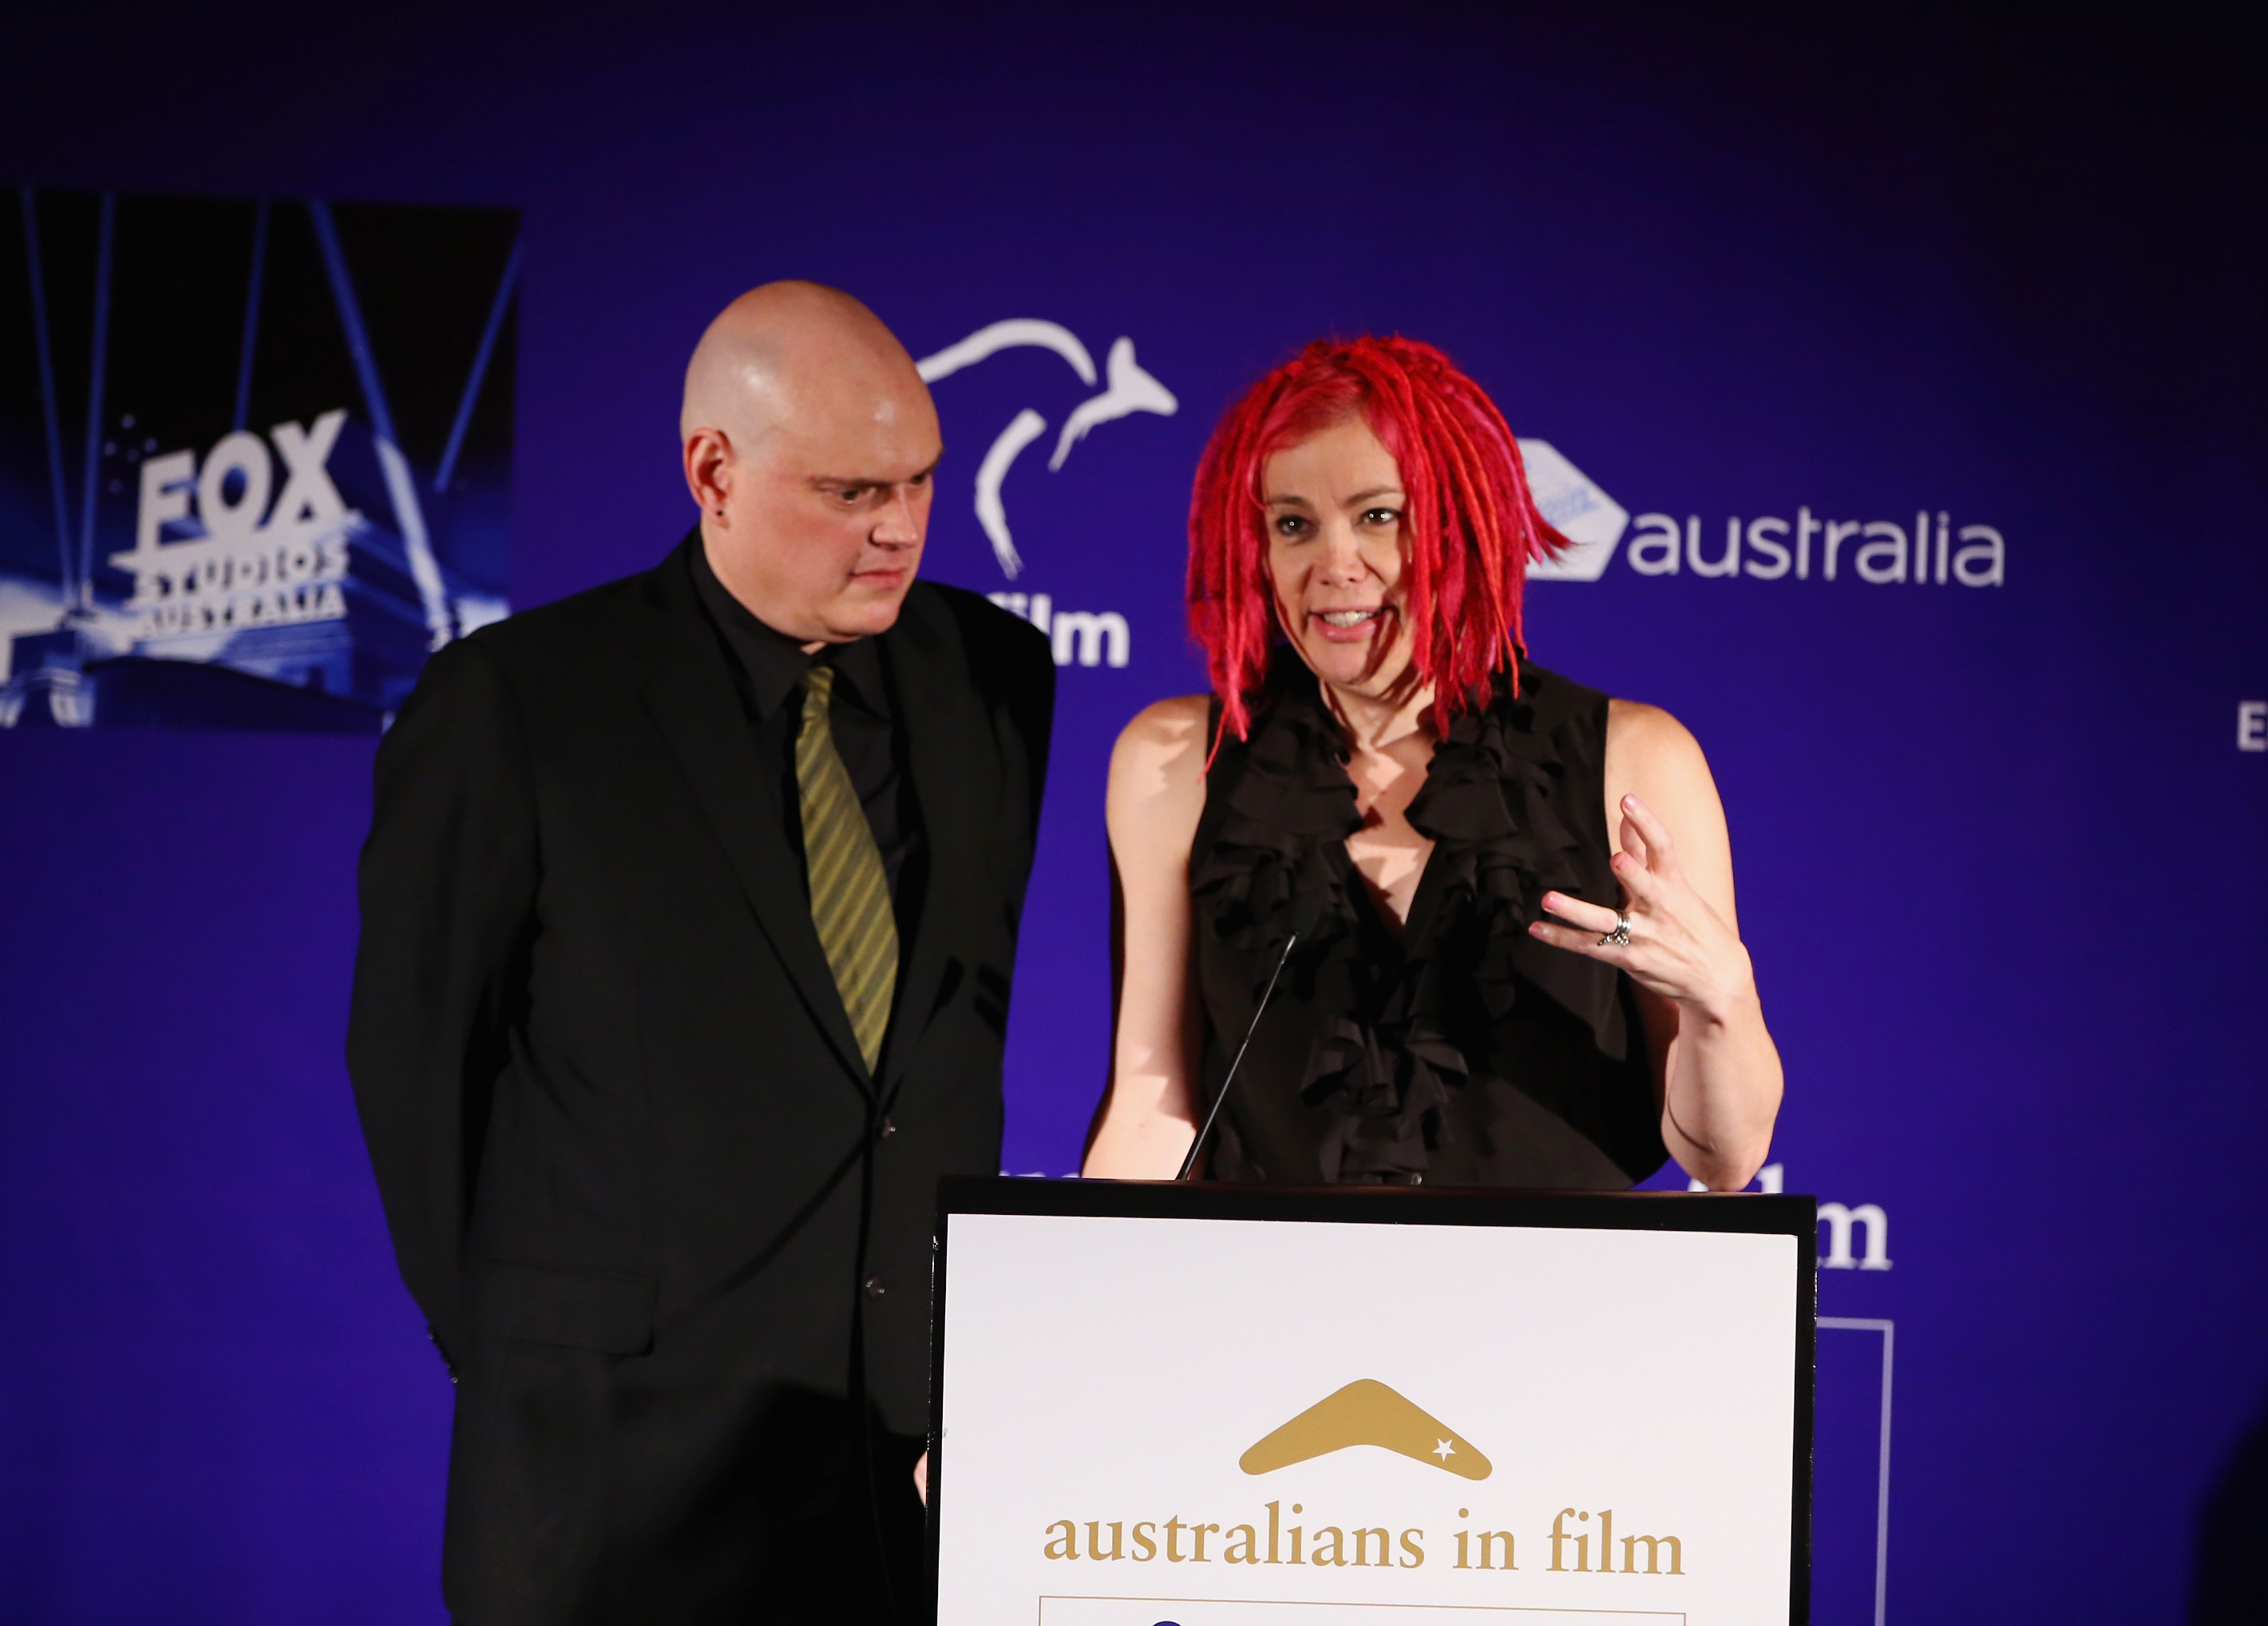 Andy Wachowski and Lana Wachowski speak onstage at the 2nd Annual Australians in Film Awards Gala at Intercontinental Hotel on October 24, 2013 in Beverly Hills, California. | Source: Getty Images